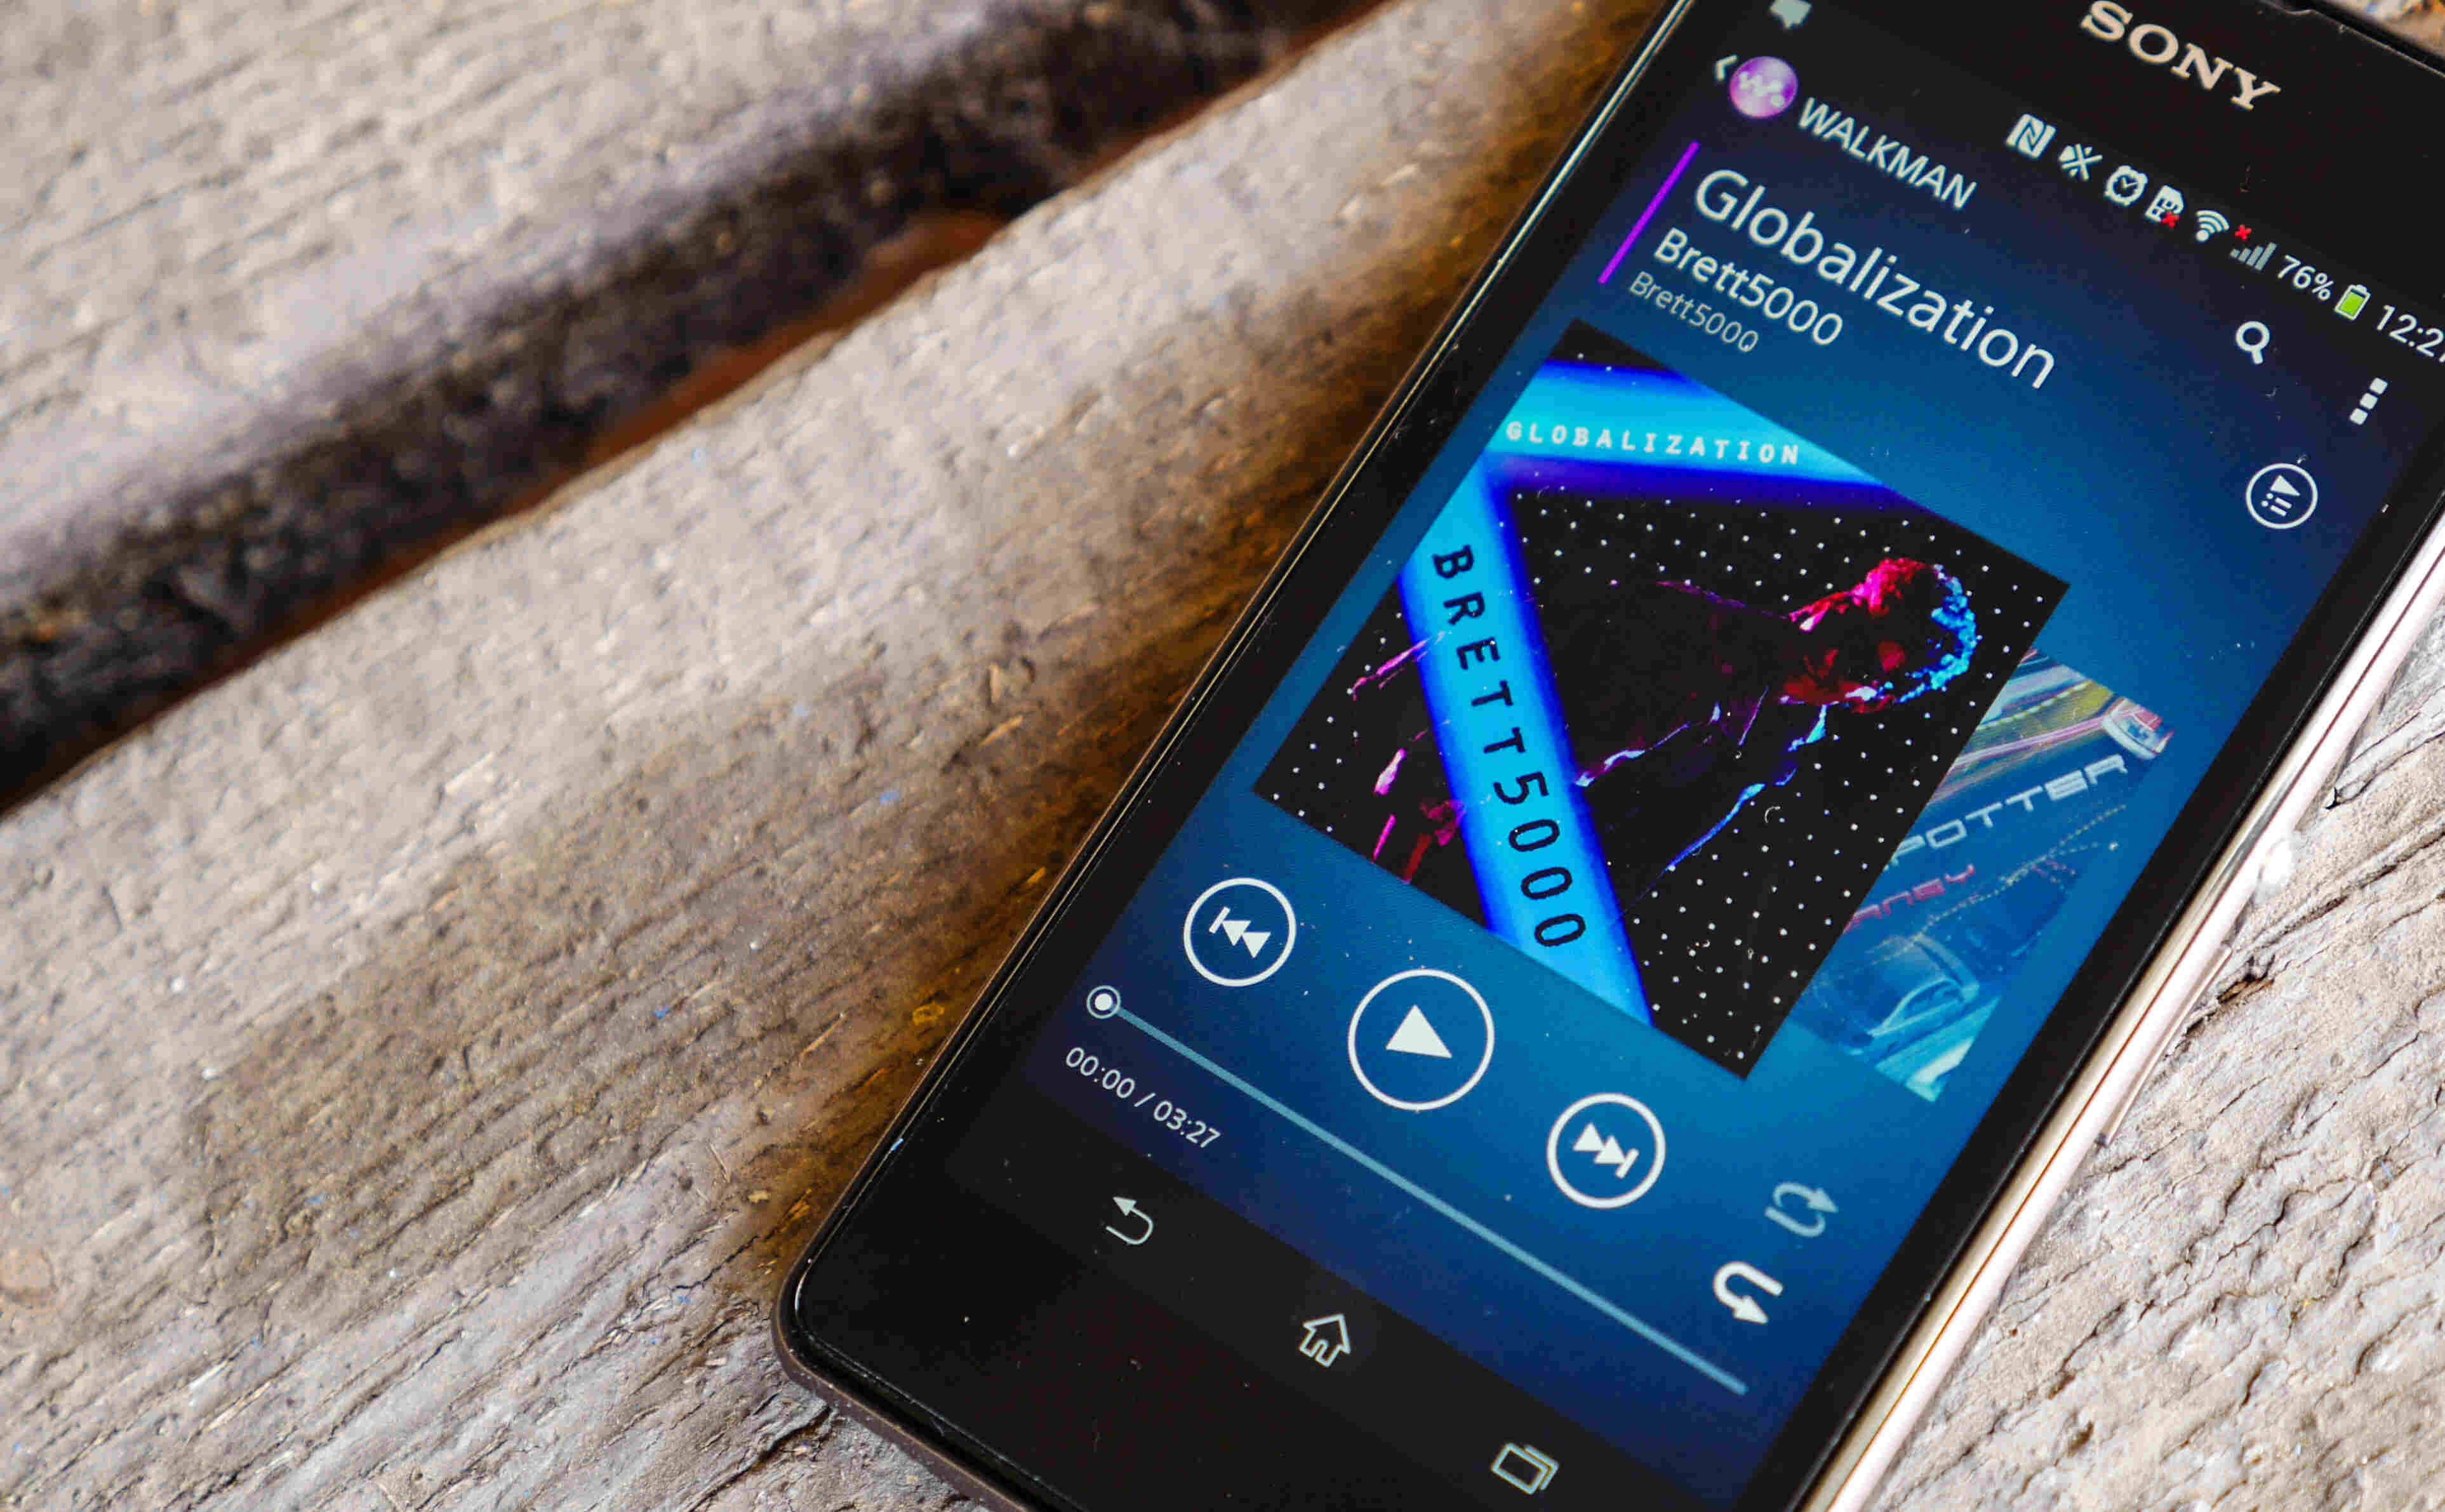 adding-music-to-your-xperia-z-downloading-guide